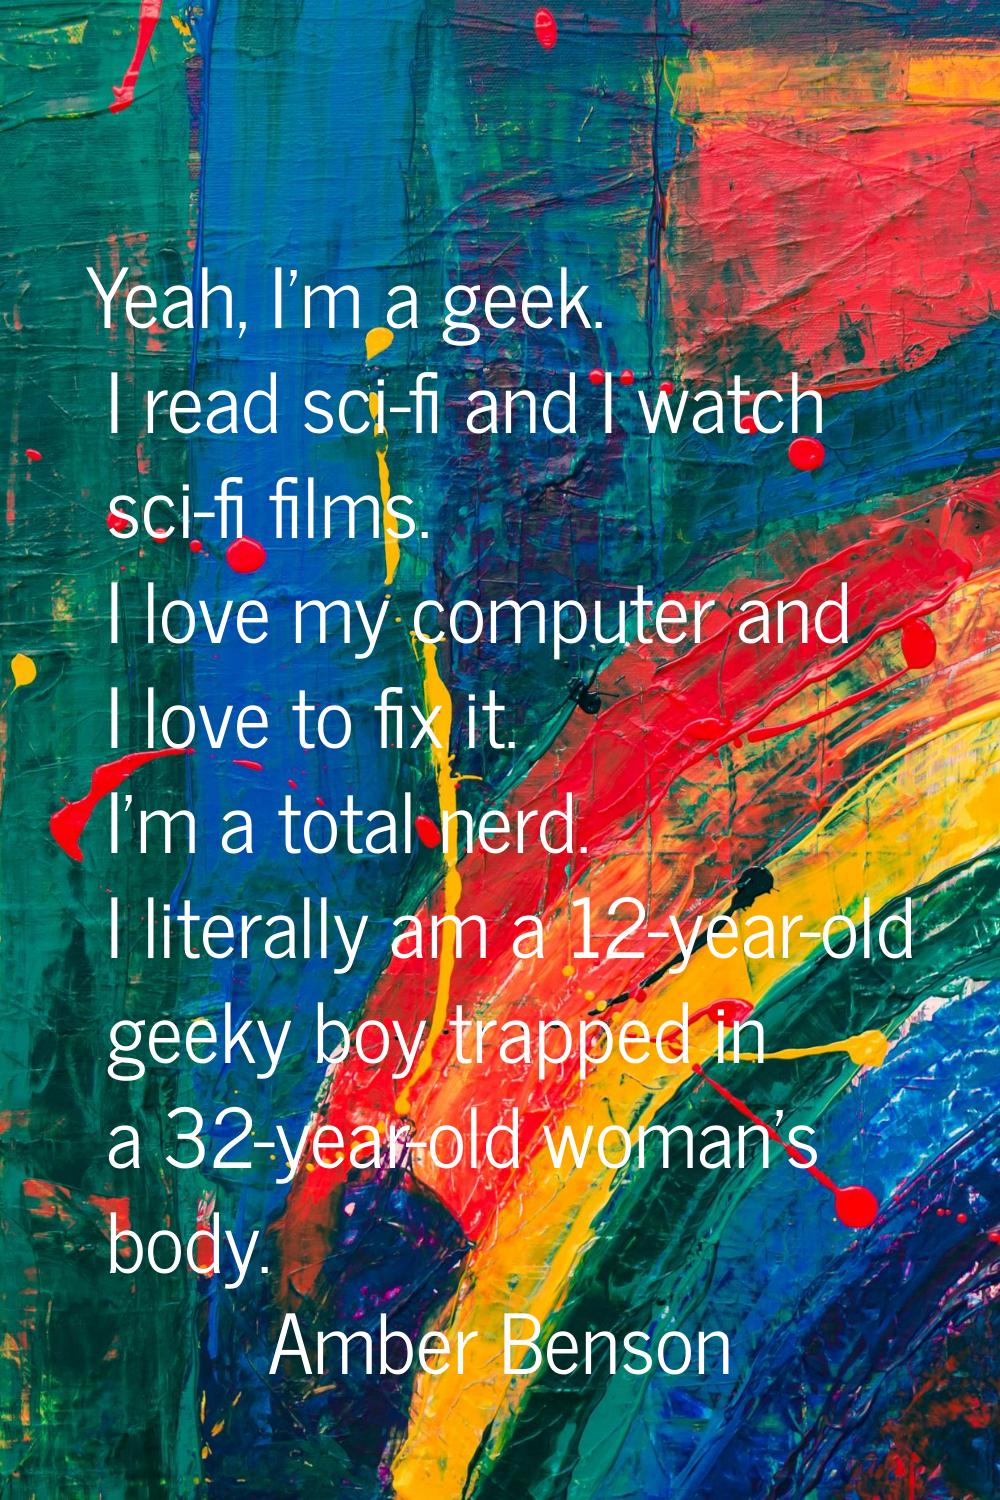 Yeah, I'm a geek. I read sci-fi and I watch sci-fi films. I love my computer and I love to fix it. 